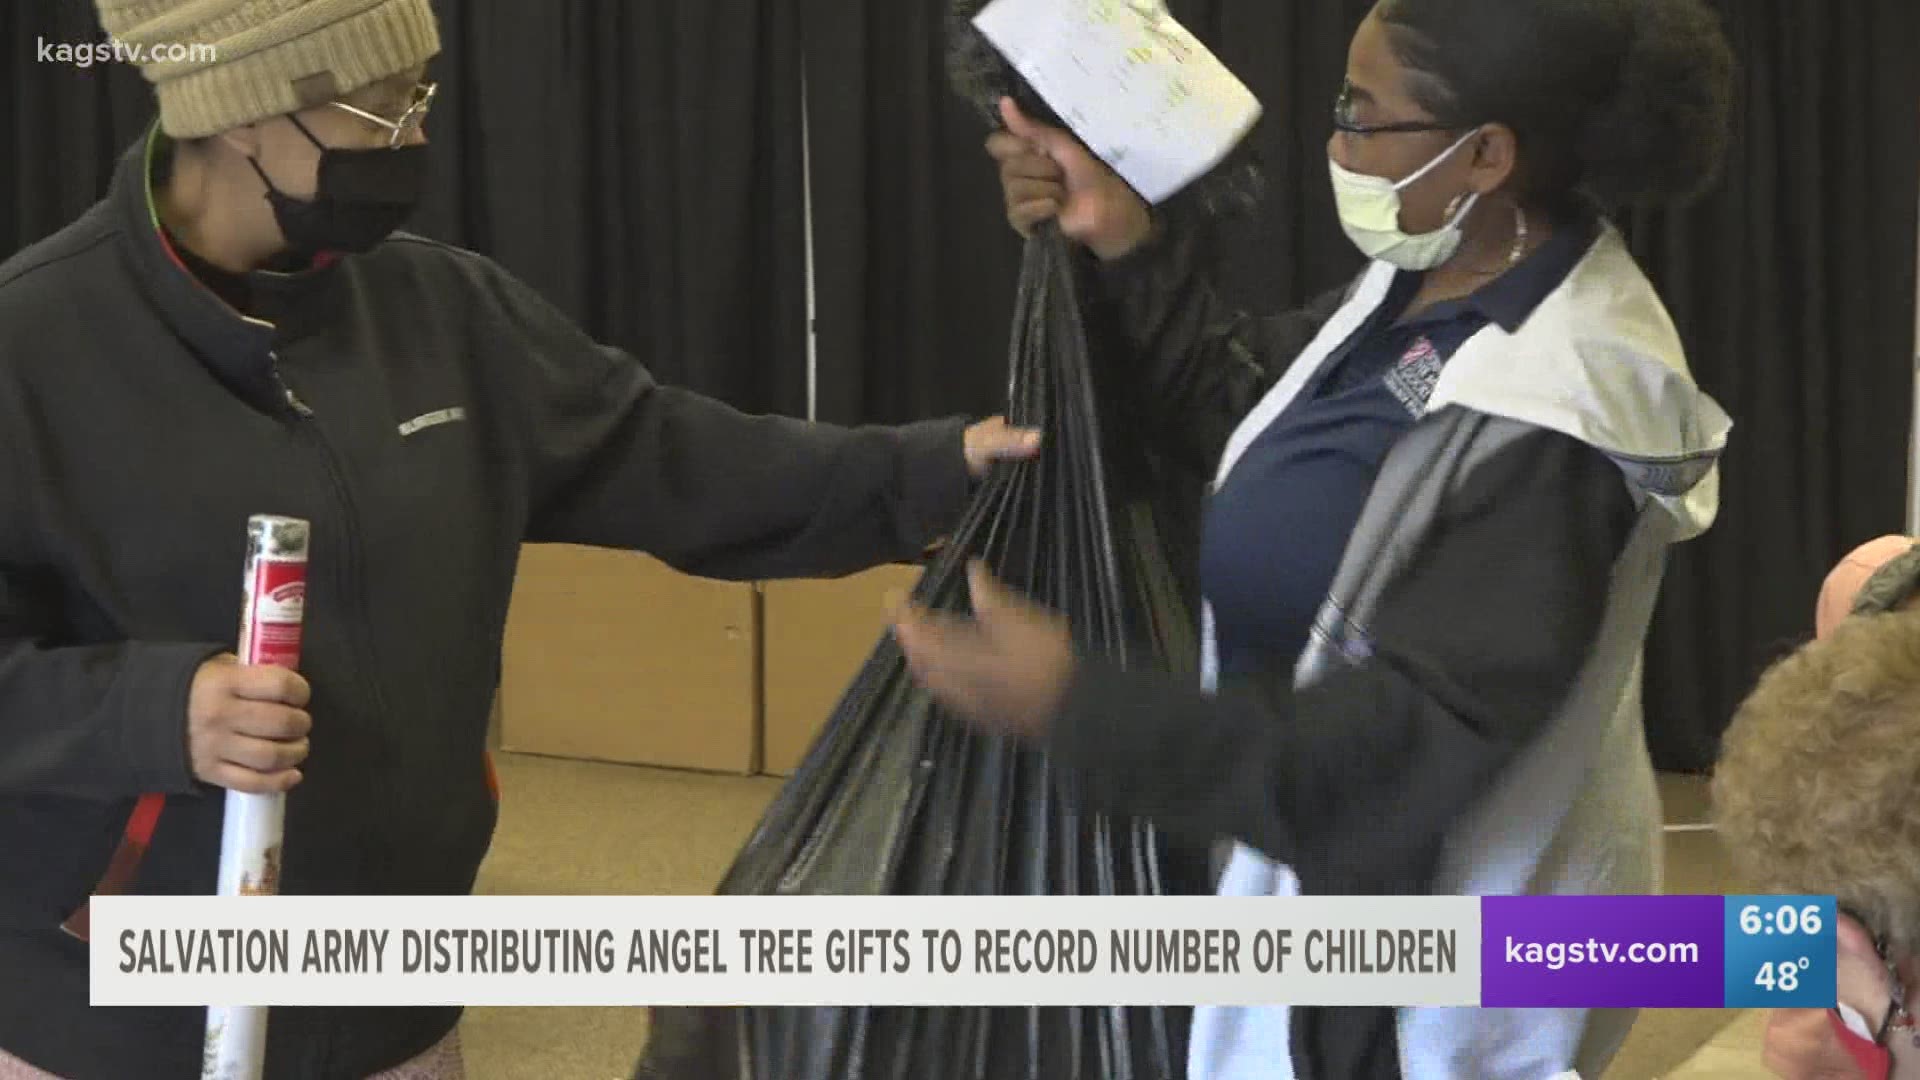 The organization donated gifts to more than 2,300 children this year.